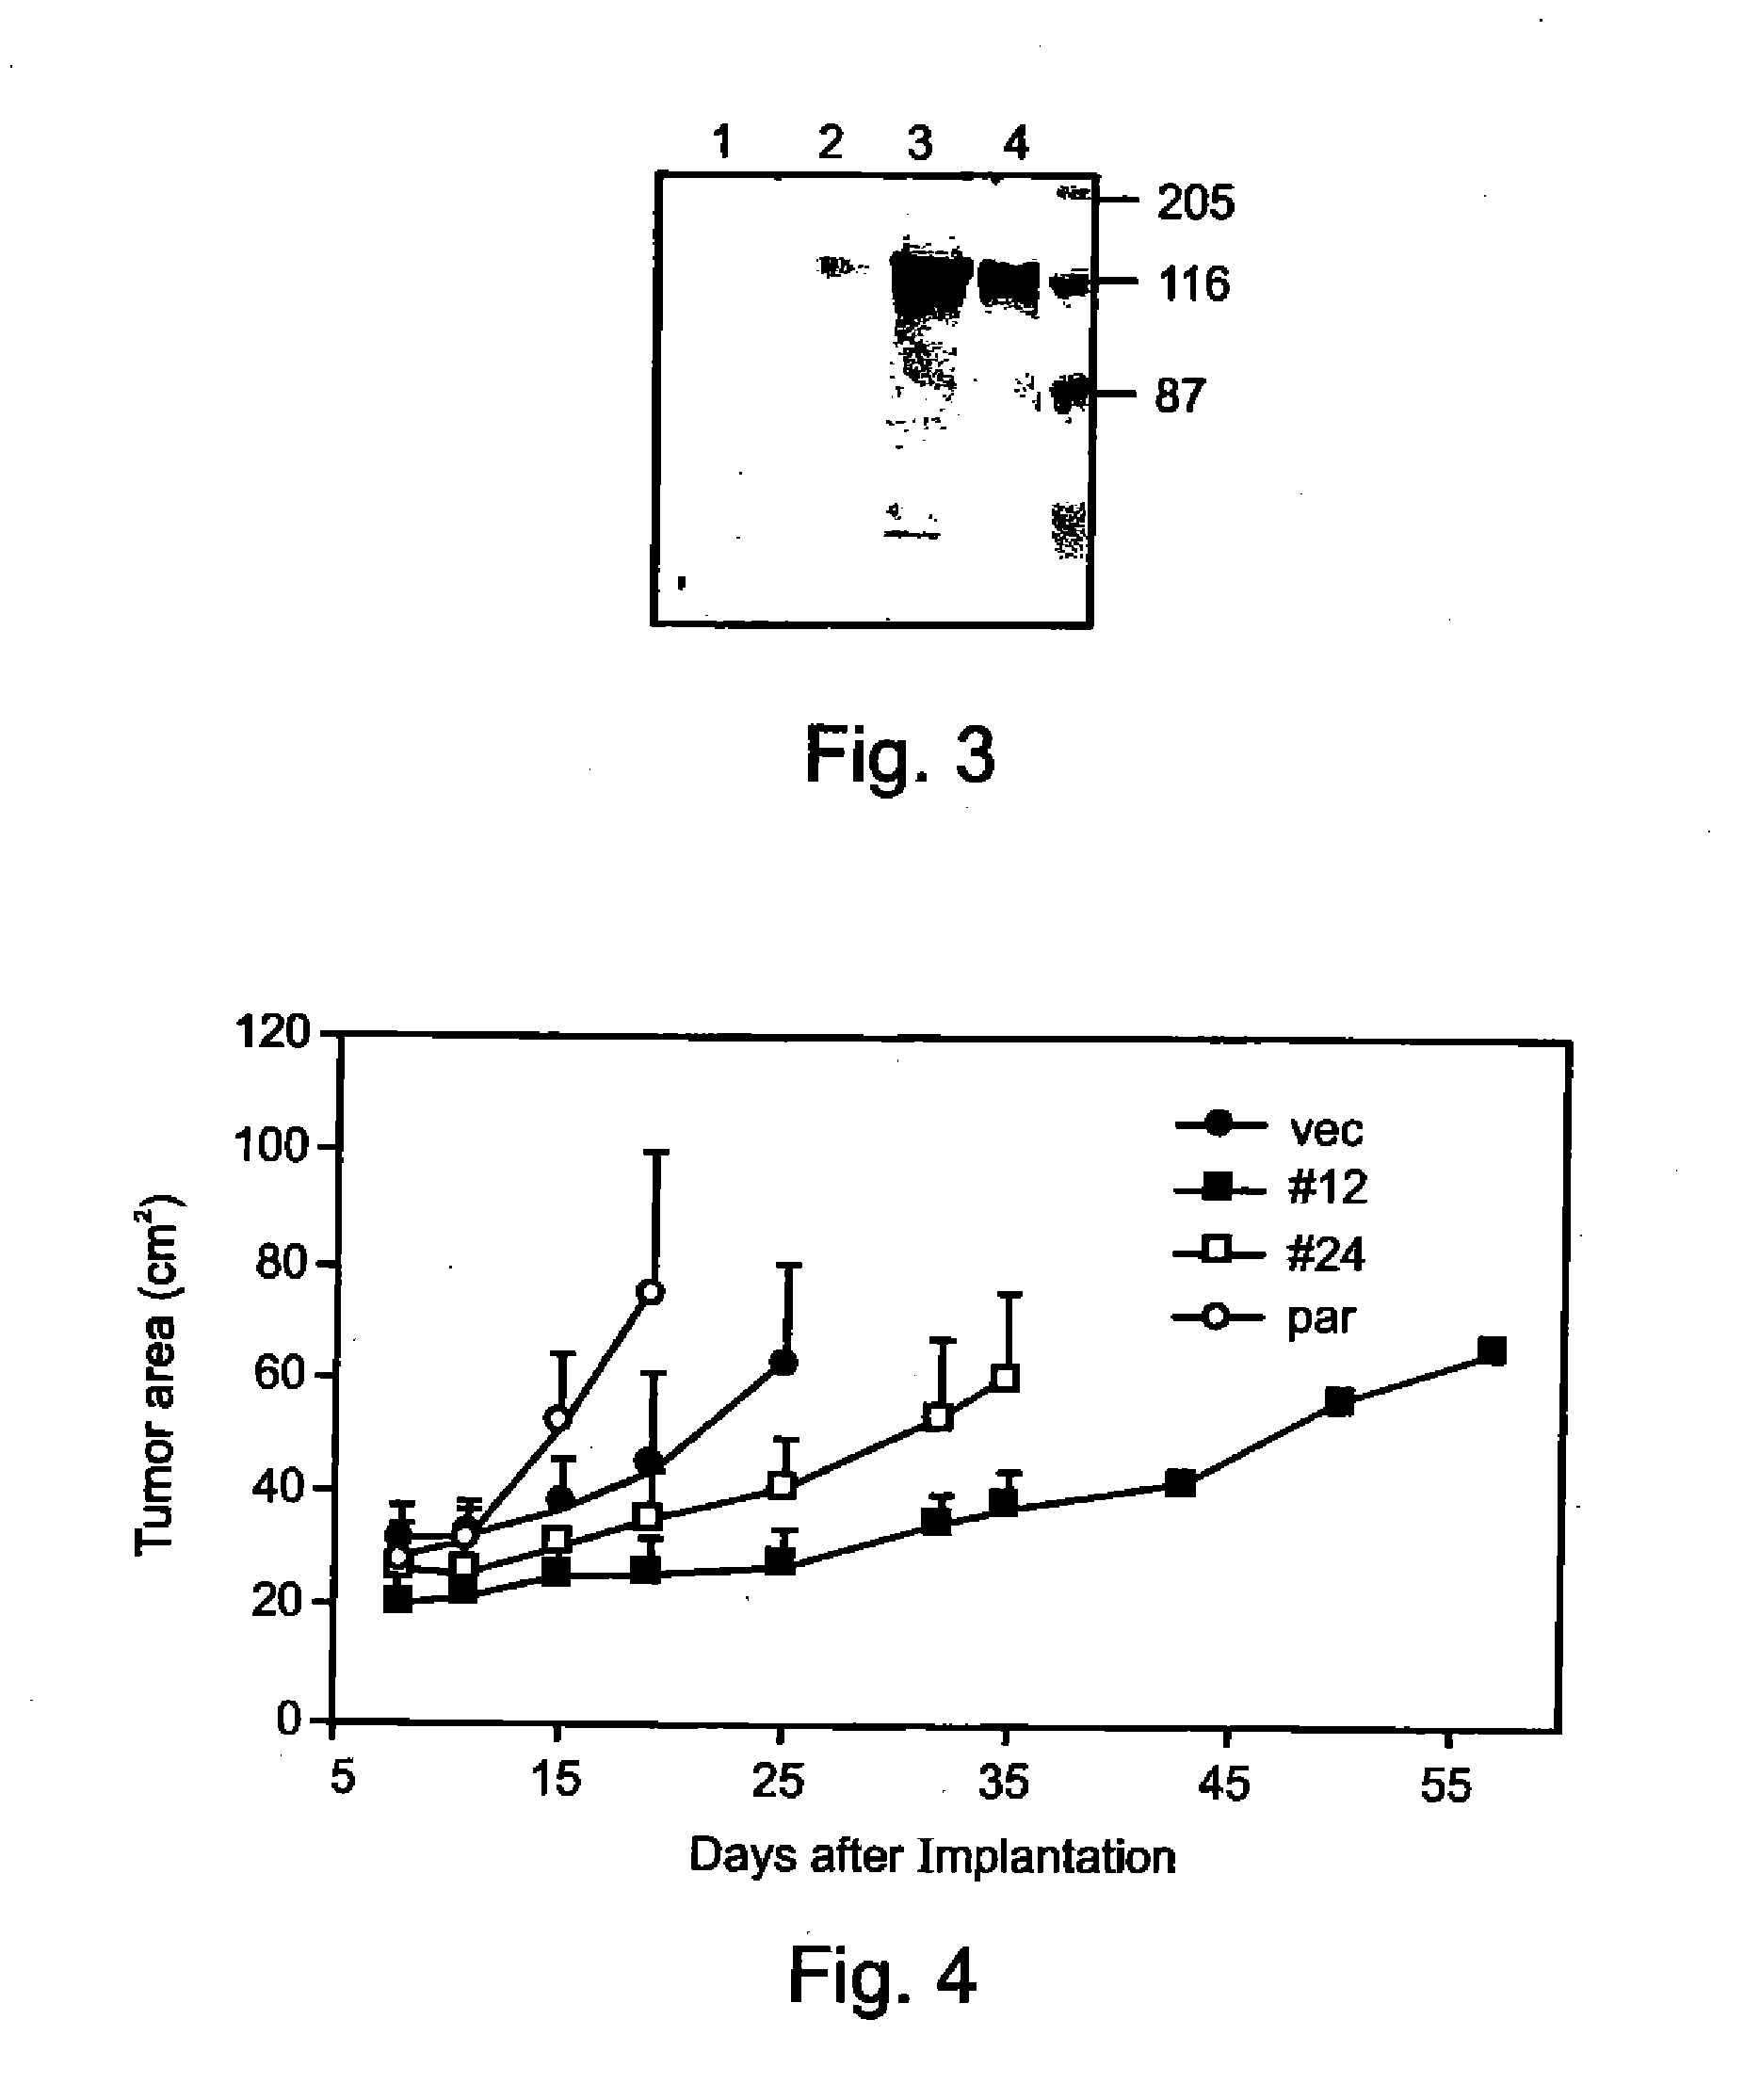 Pharmaceutical compositions and methods useful for modulating angiogenesis, inhibiting metastasis and tumor fibrosis, and assessing the malignancy of colon cancer tumors